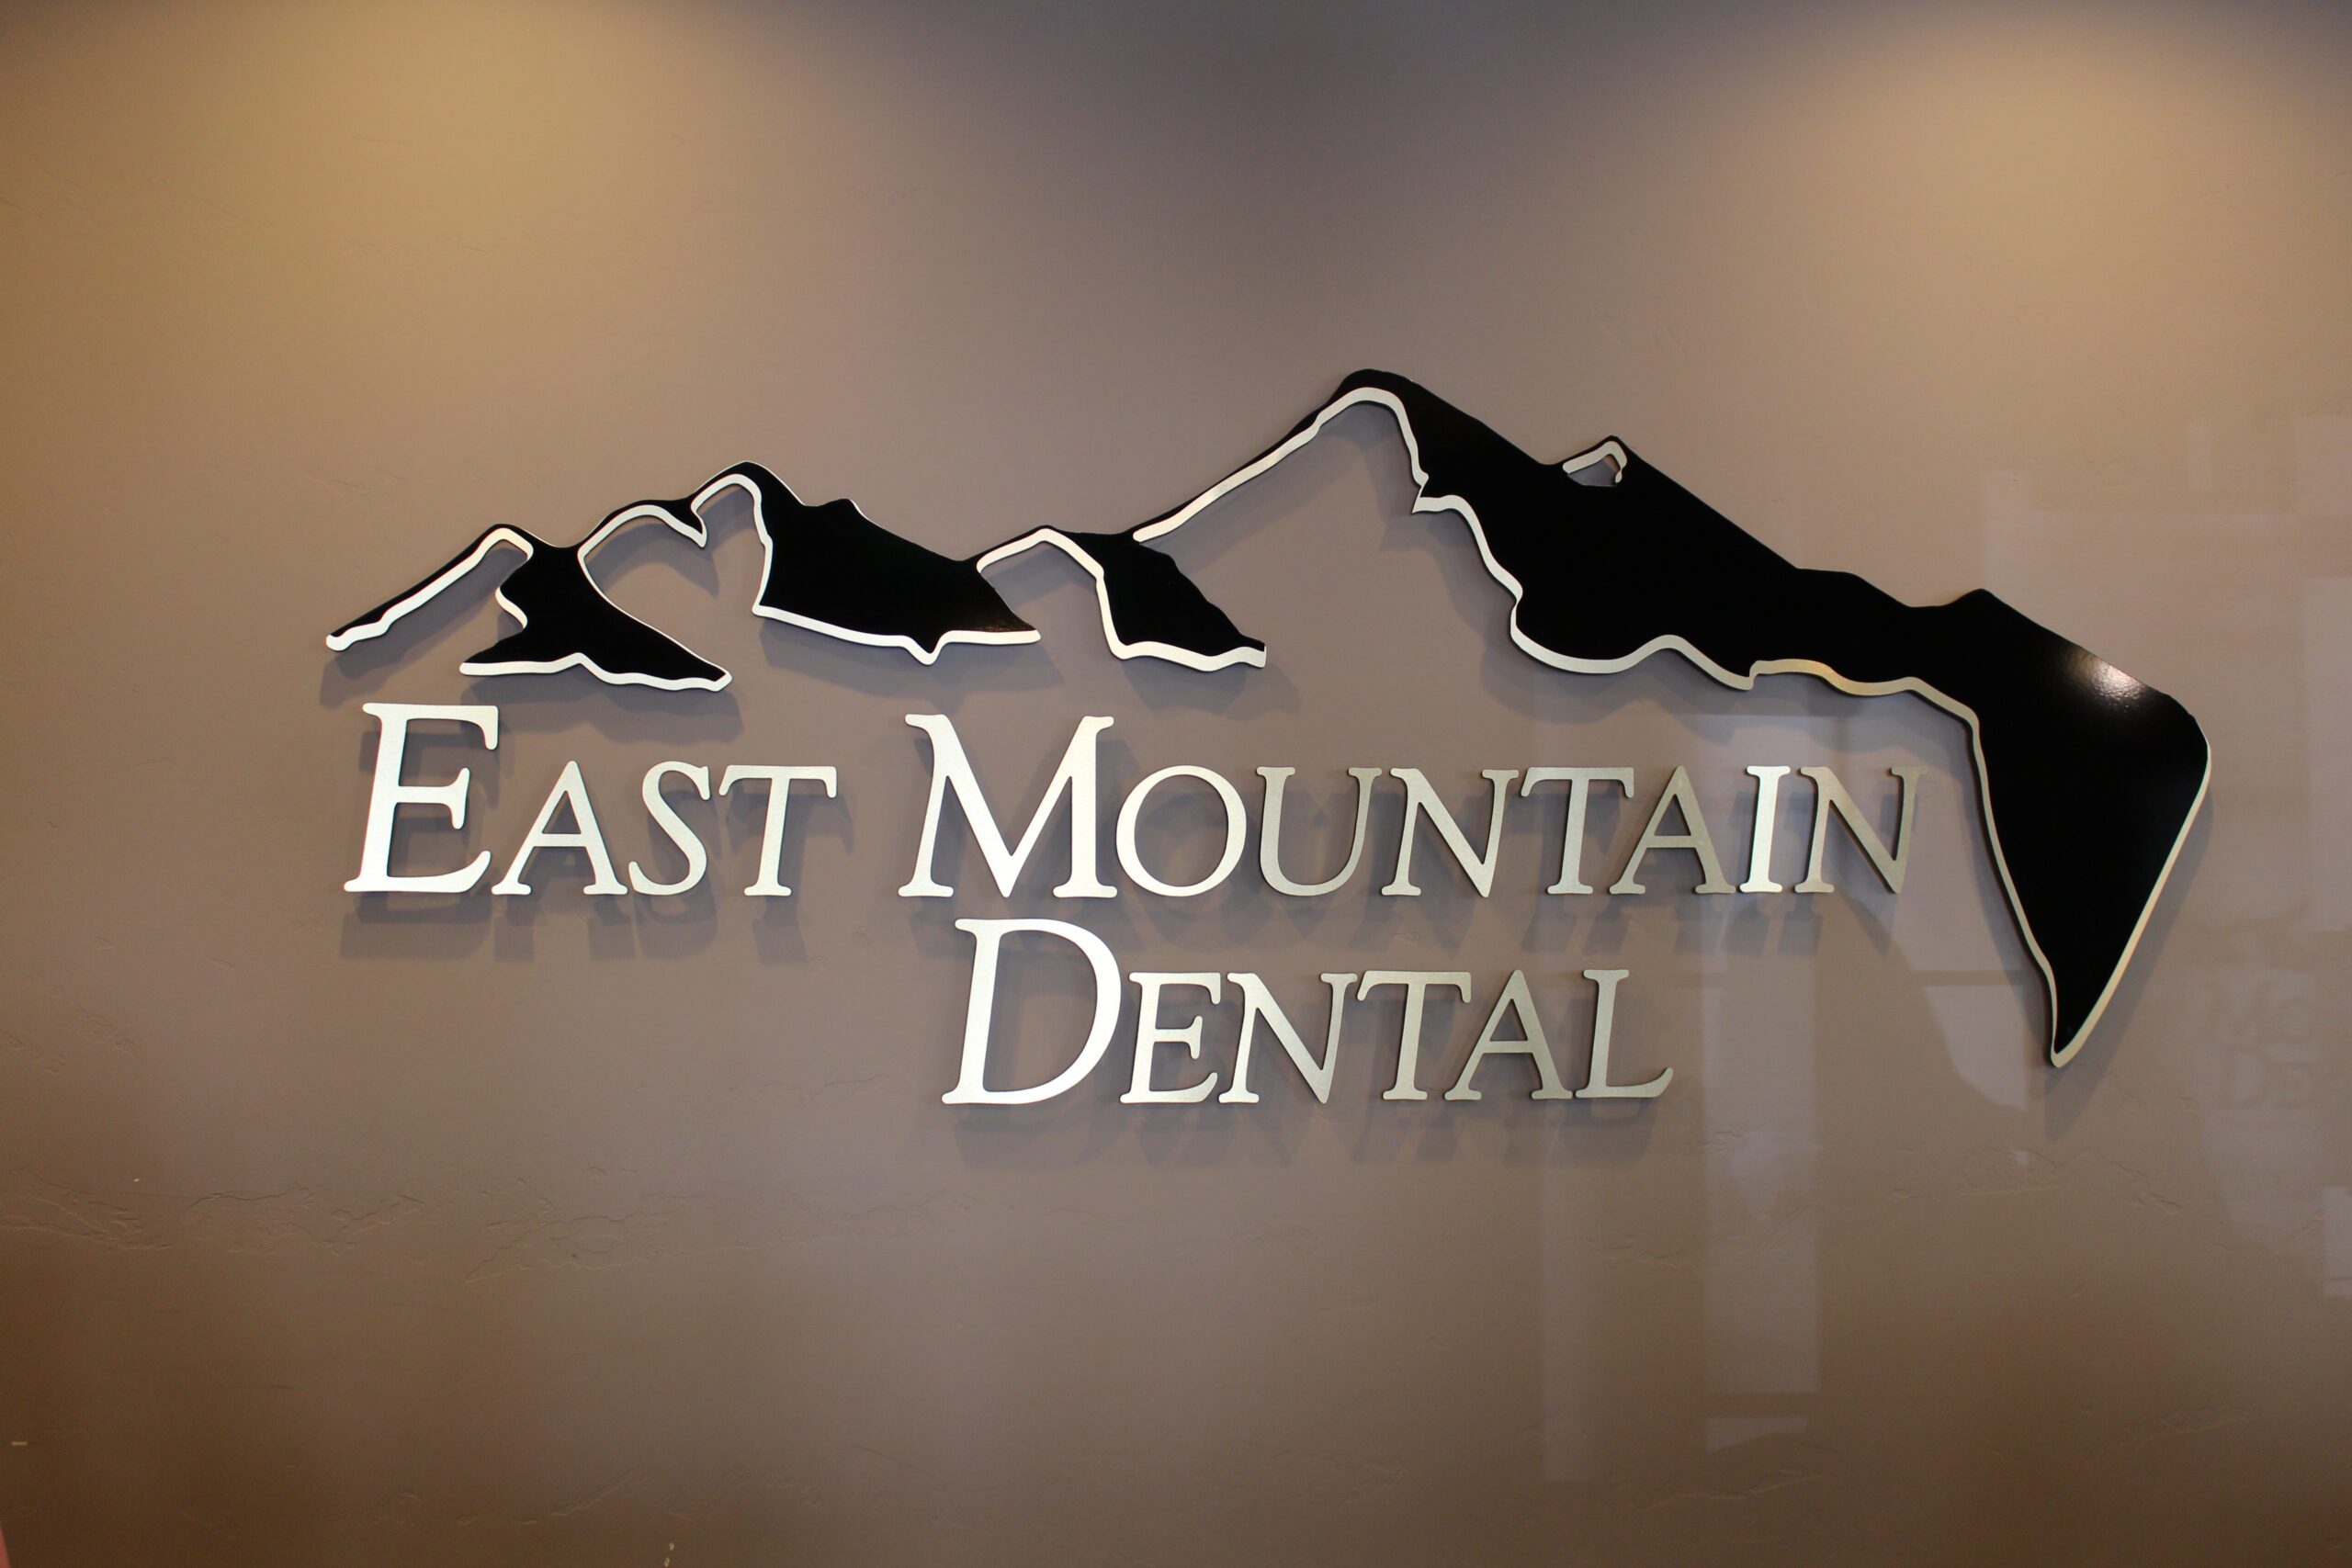 Dr. Ryan Hamilton Dr. Seager Dr. Michael Robert. East Mountain Dental. General, Cosmetic, Restorative, Family Dentist in Provo, UT 84606